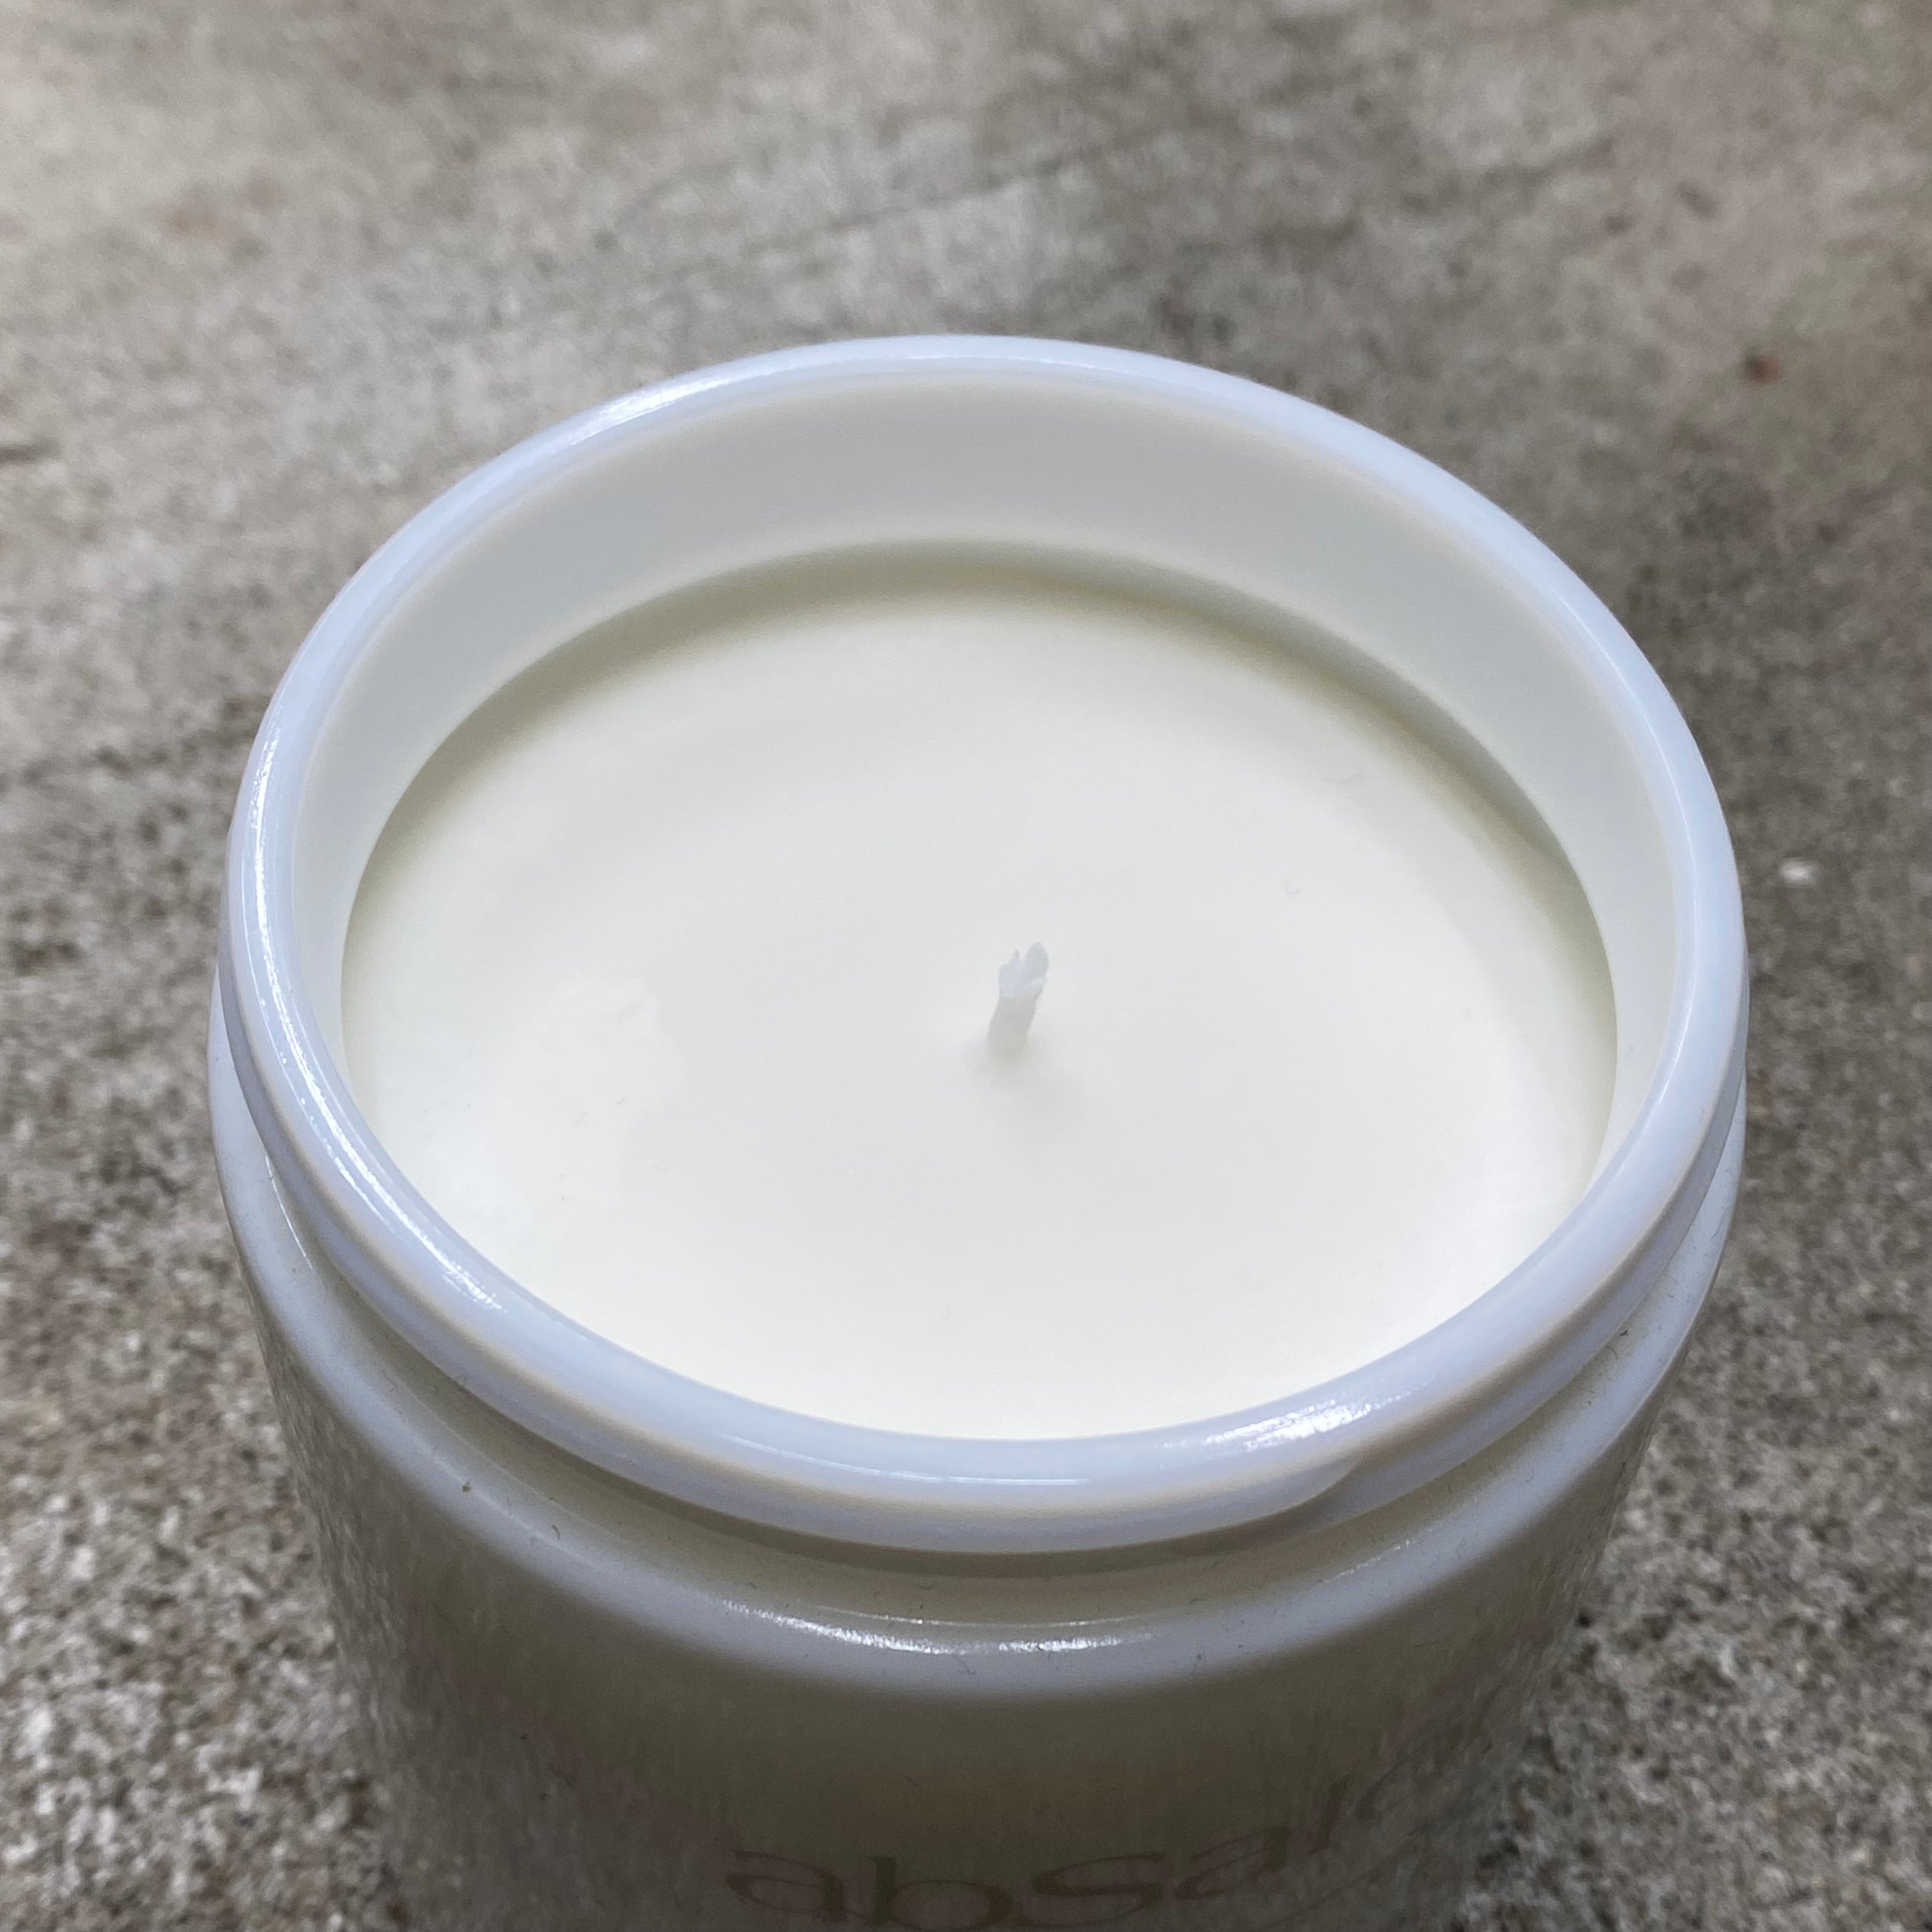 SPRING SLEEP SCENTED CANDLE - NORWEGIAN - / abSalon